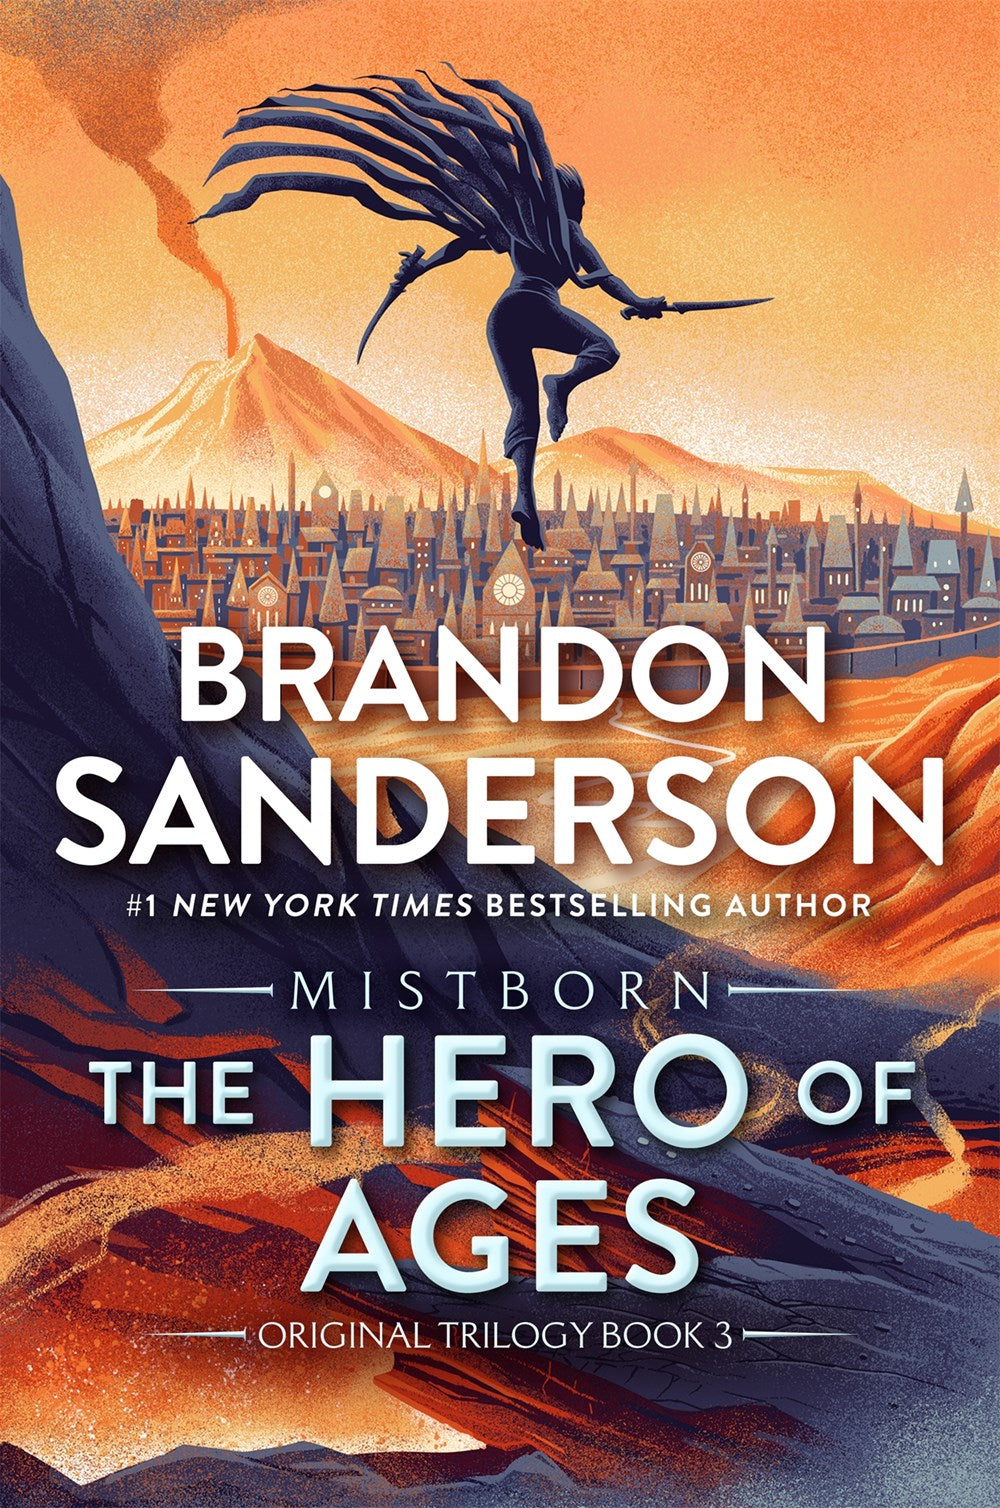 The Hero of Ages (Mistborn Book 3)